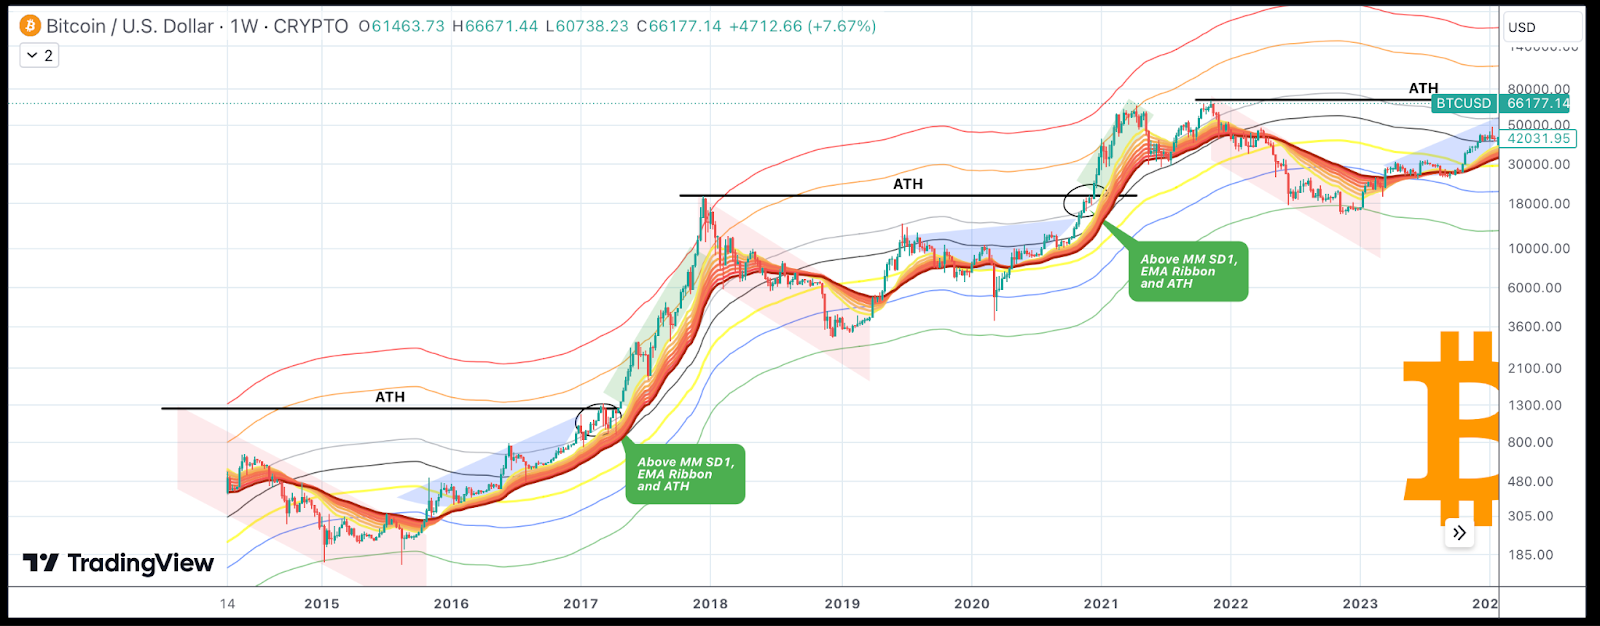 Bitcoin's path to $150,000: how likely is it? - 1